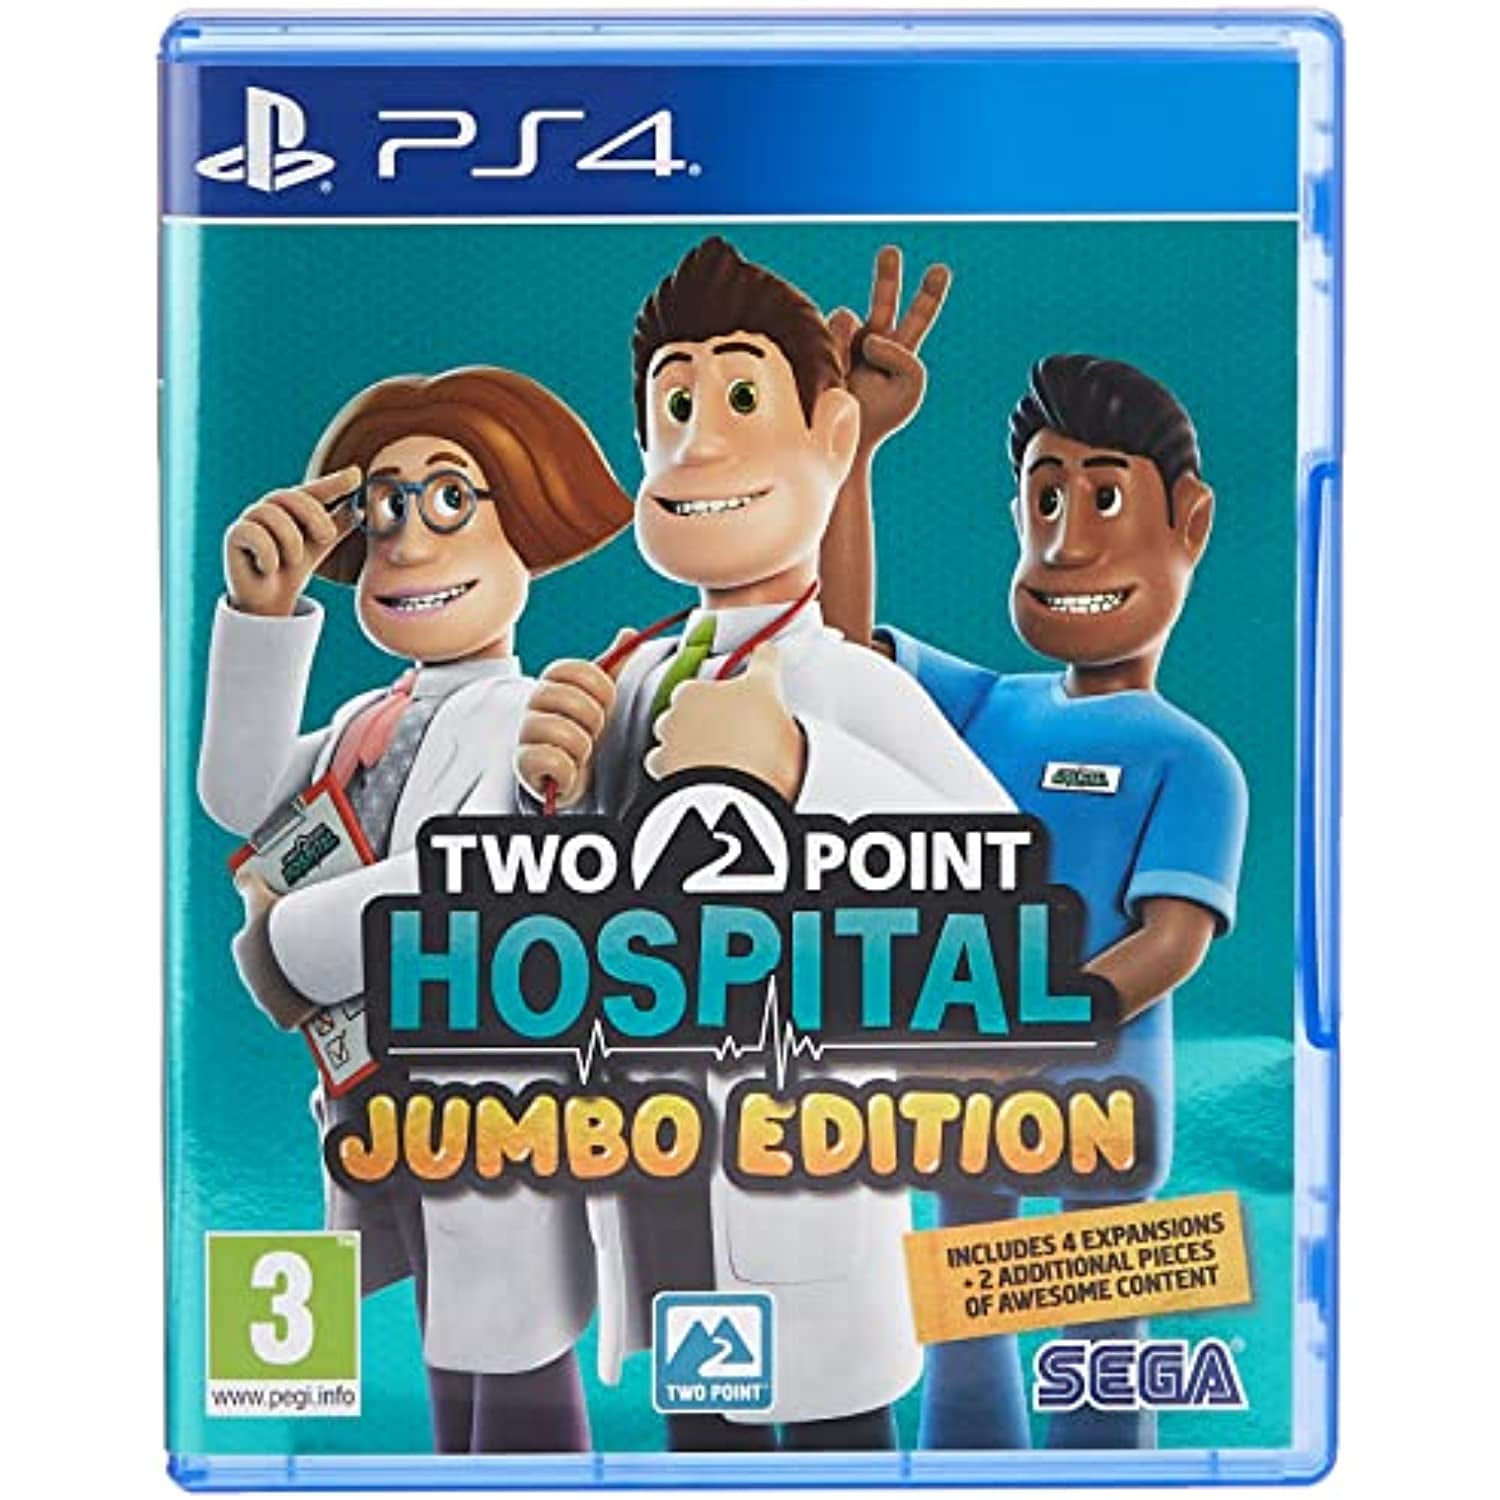 Point Jumbo Edition (PS4 Playstation 4) includes 4 expansions plus 2 additional pieces of awesome content - Walmart.com